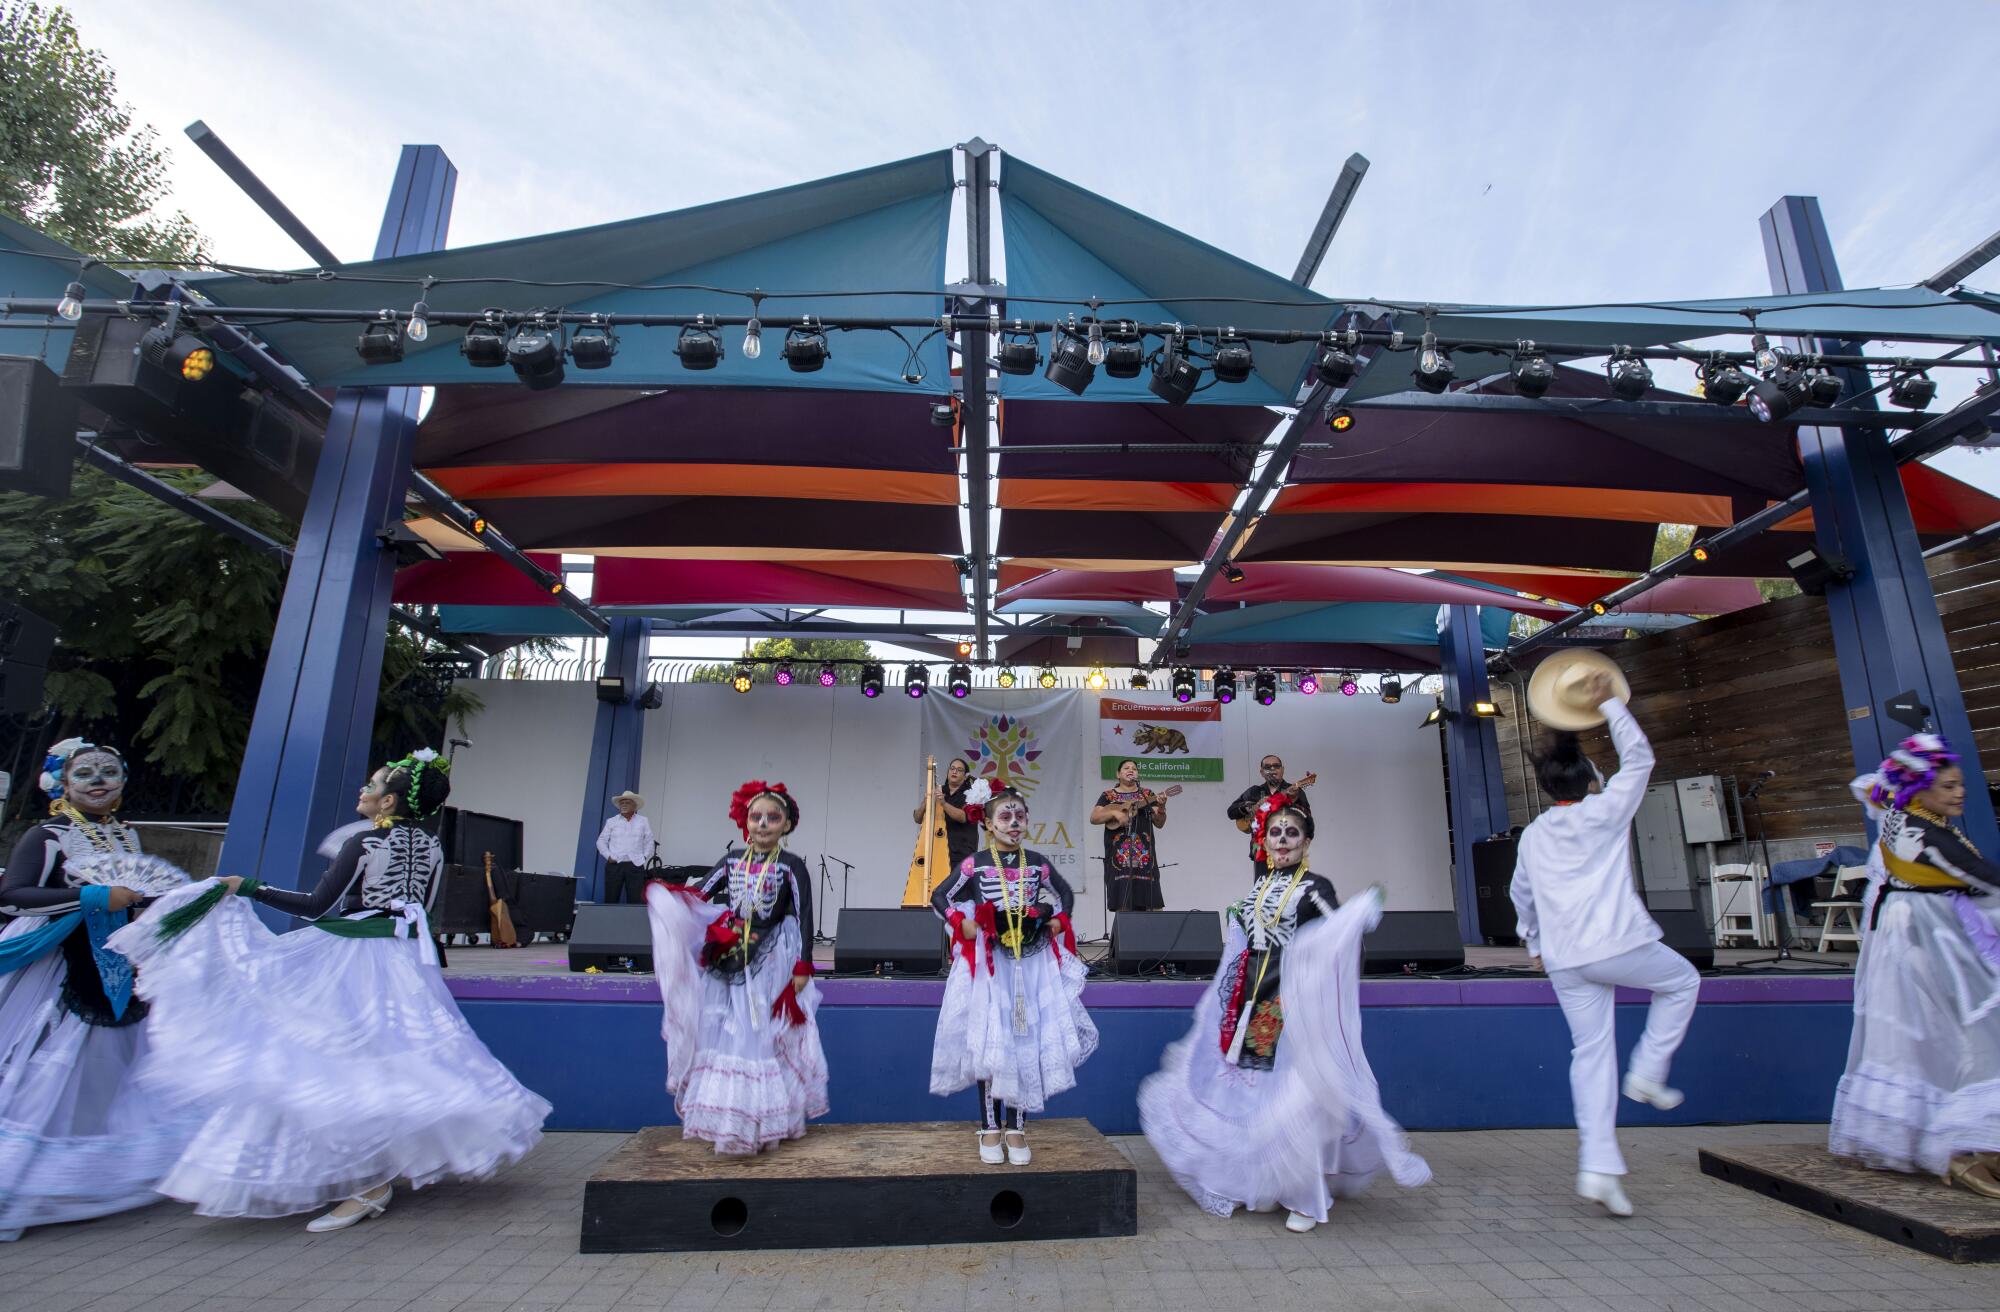 Grupo Folklórico Huitzillin dances in front of the stage while Tenocelomeh plays onstage.